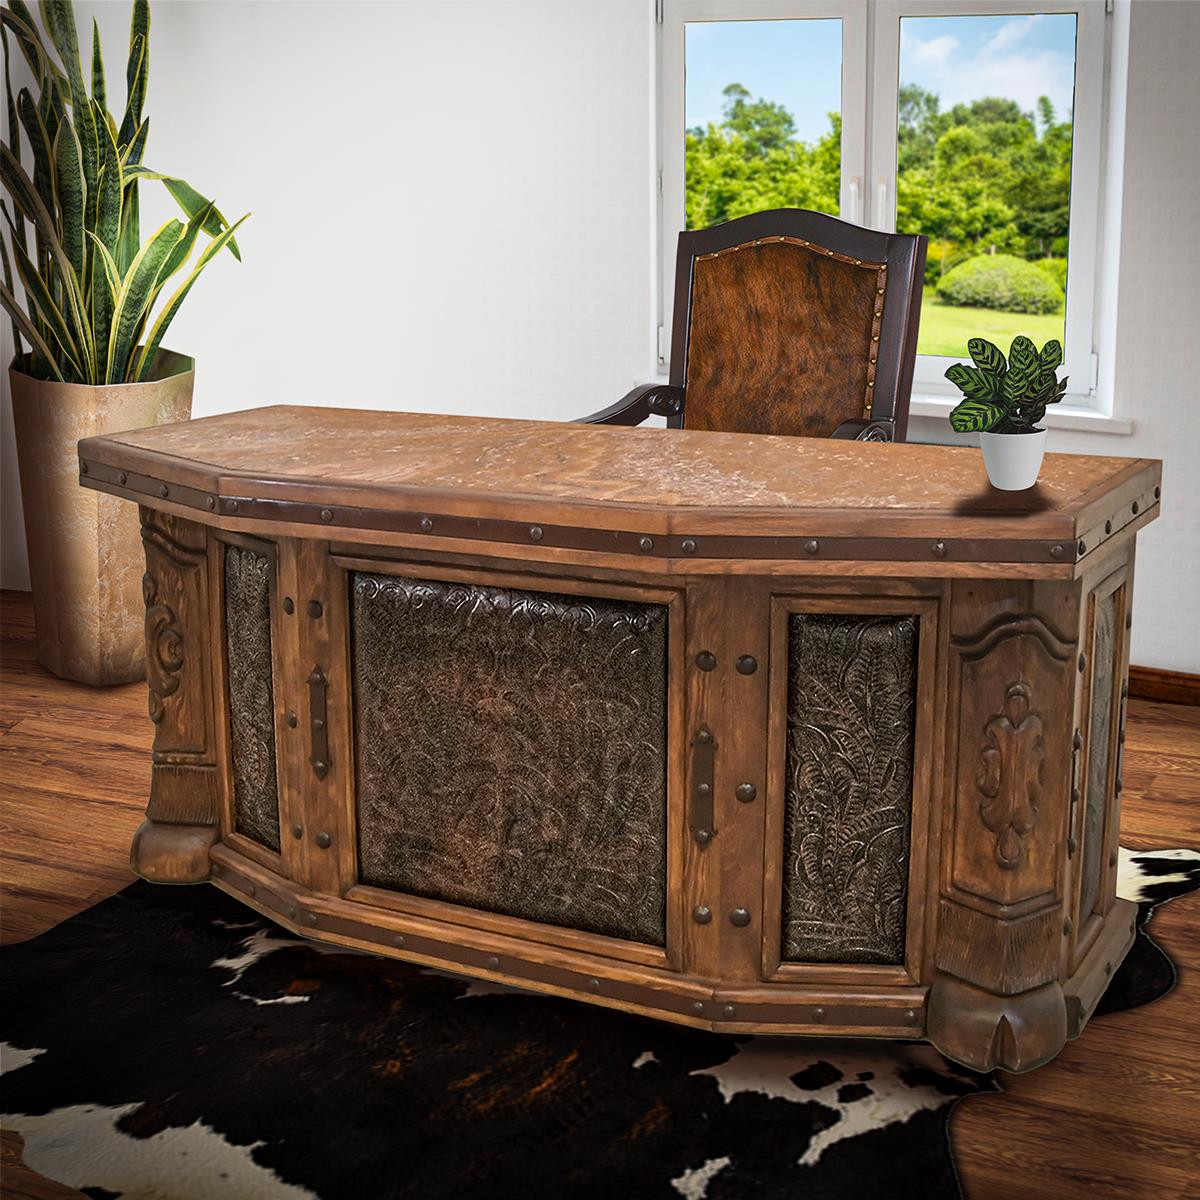 Montana Executive Desk with Tooled Leather Accents